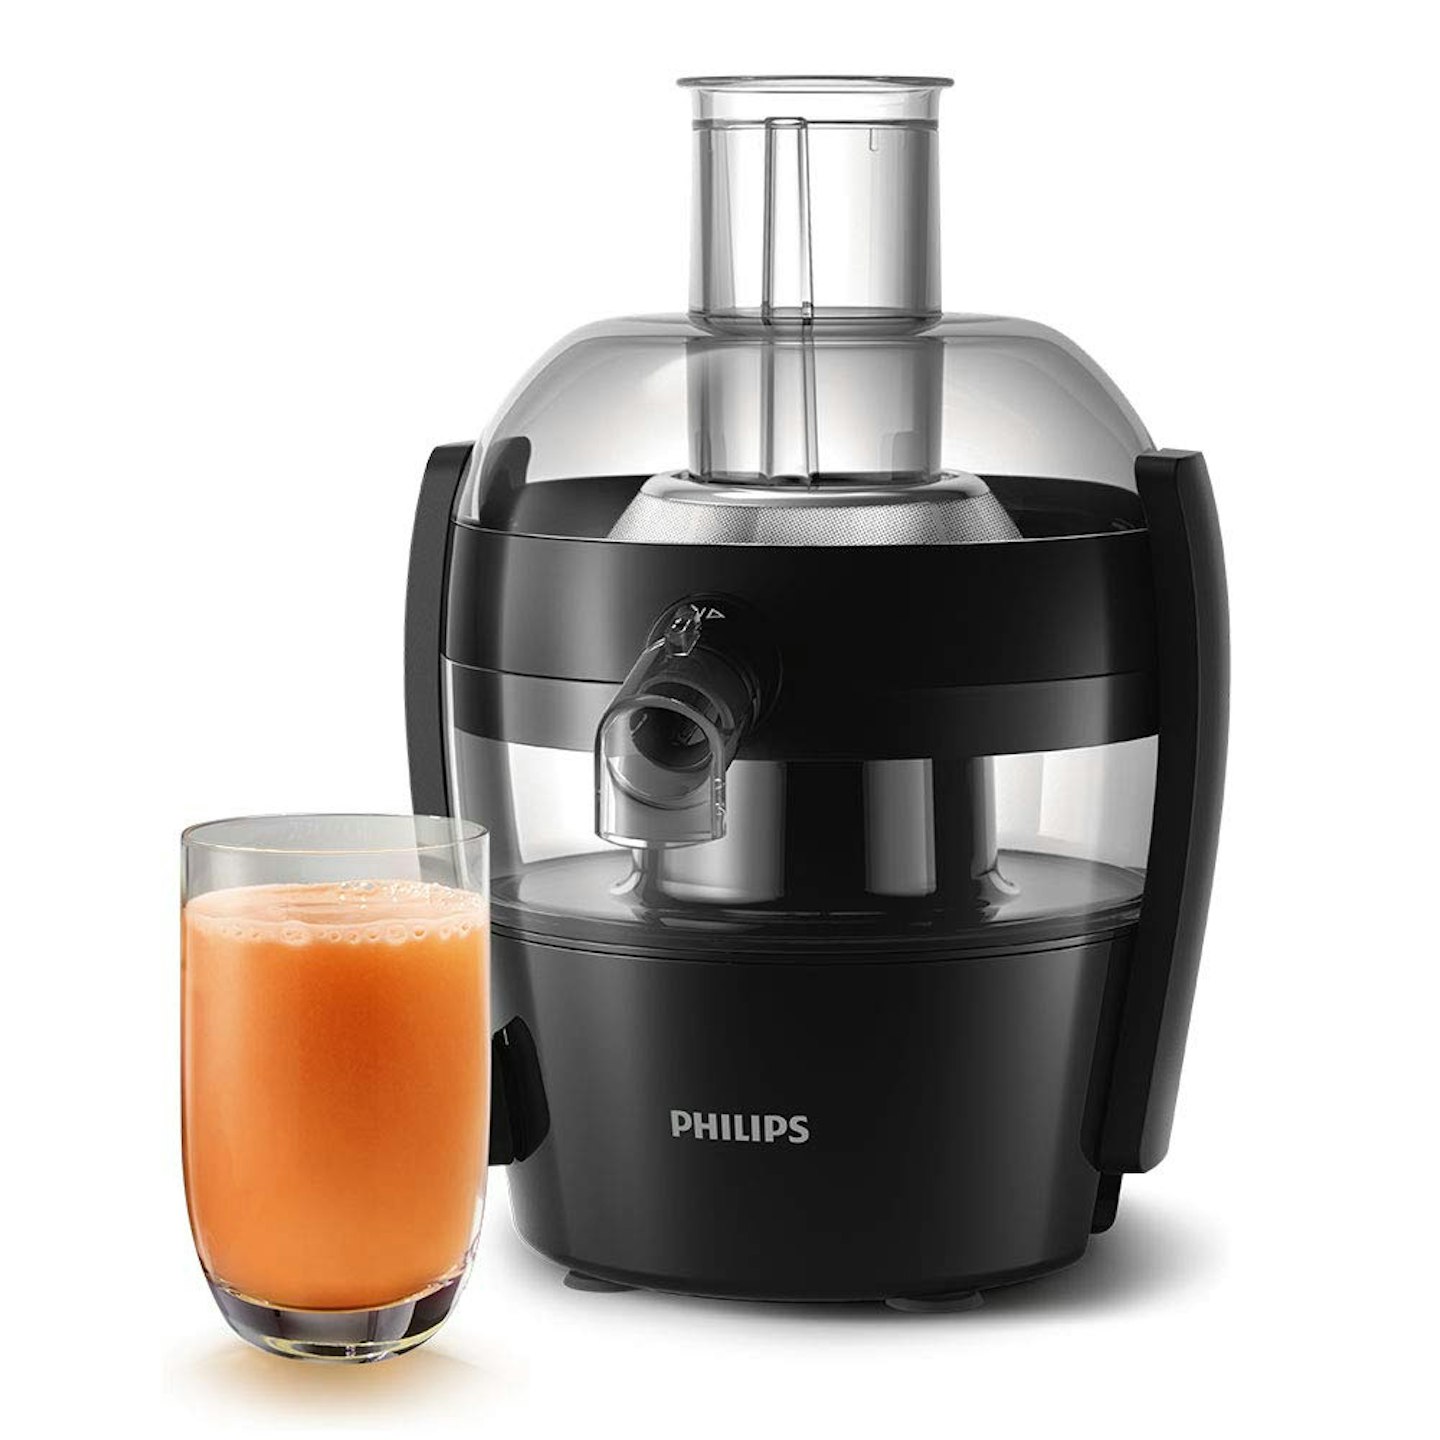 Philips HR1832/01 Viva Collection Compact Juicer, 69.99